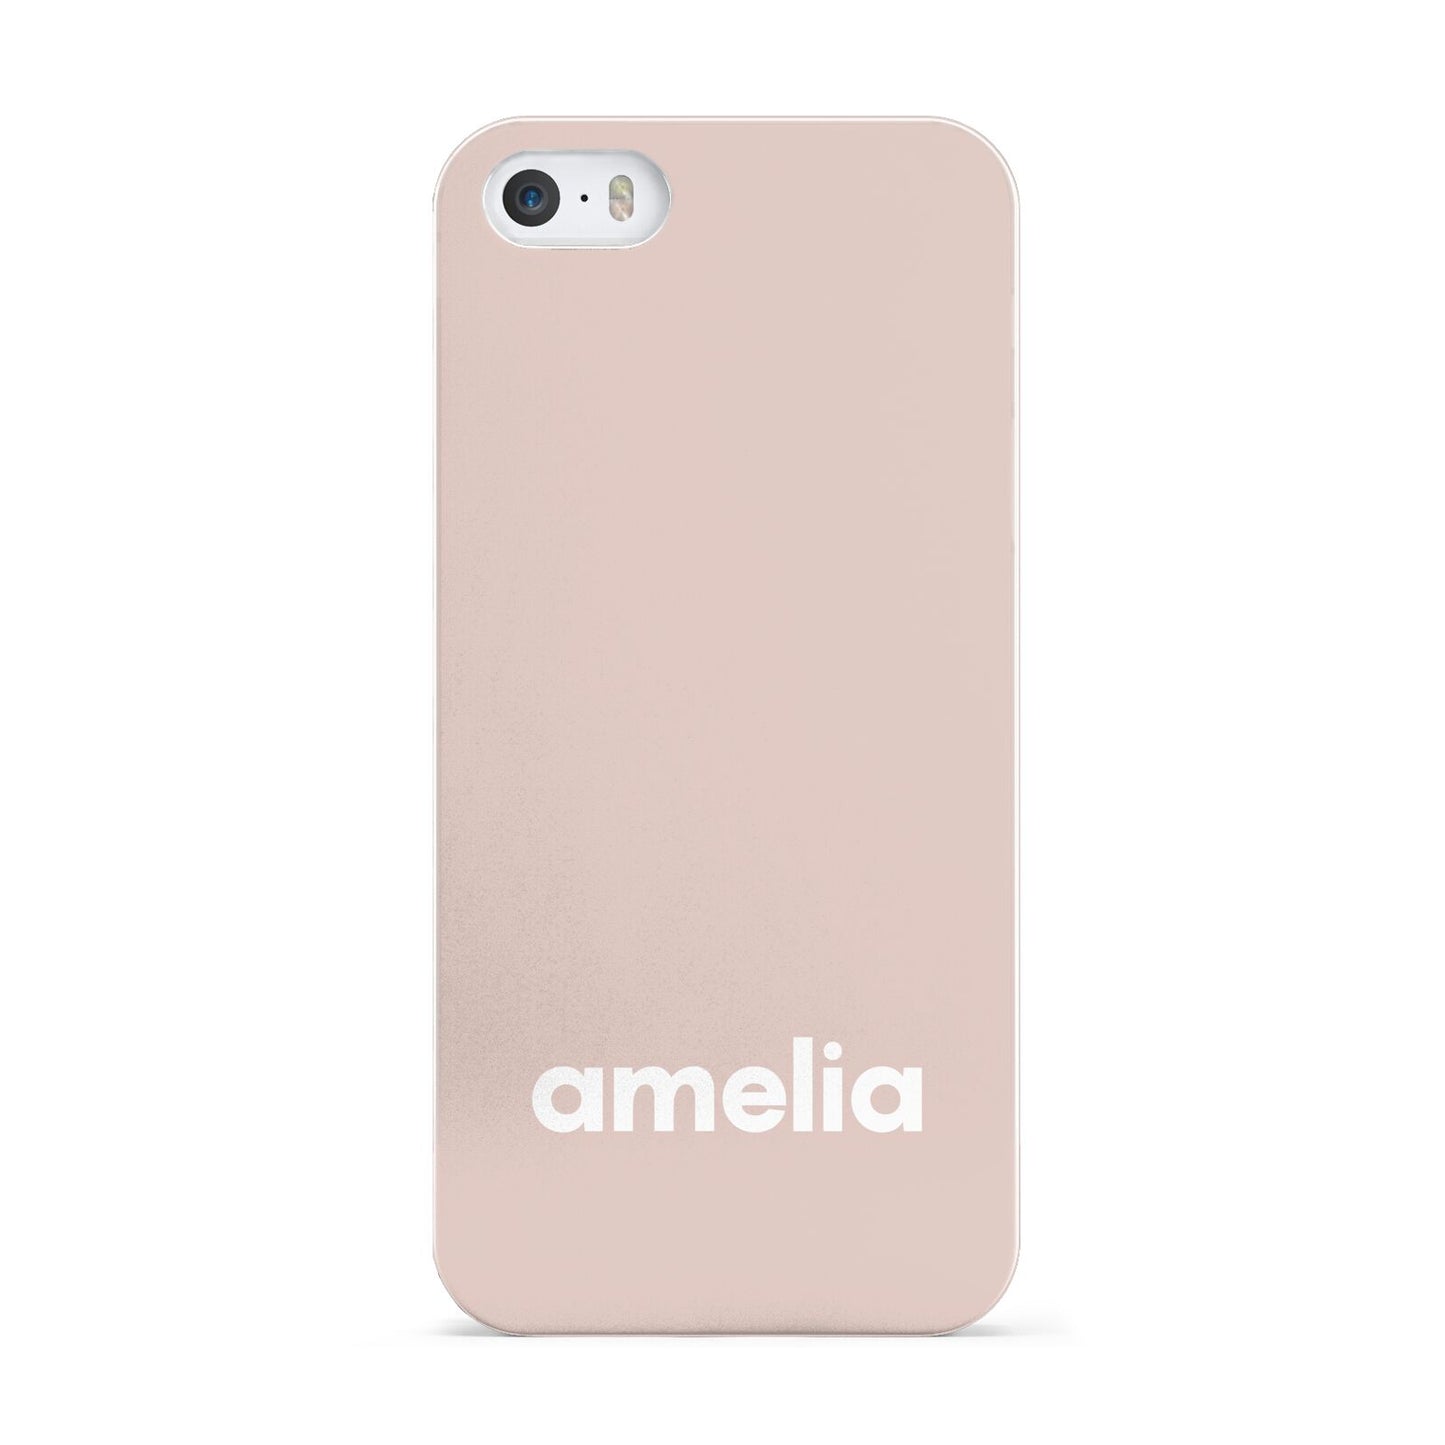 Simple Blush Pink with Name Apple iPhone 5 Case